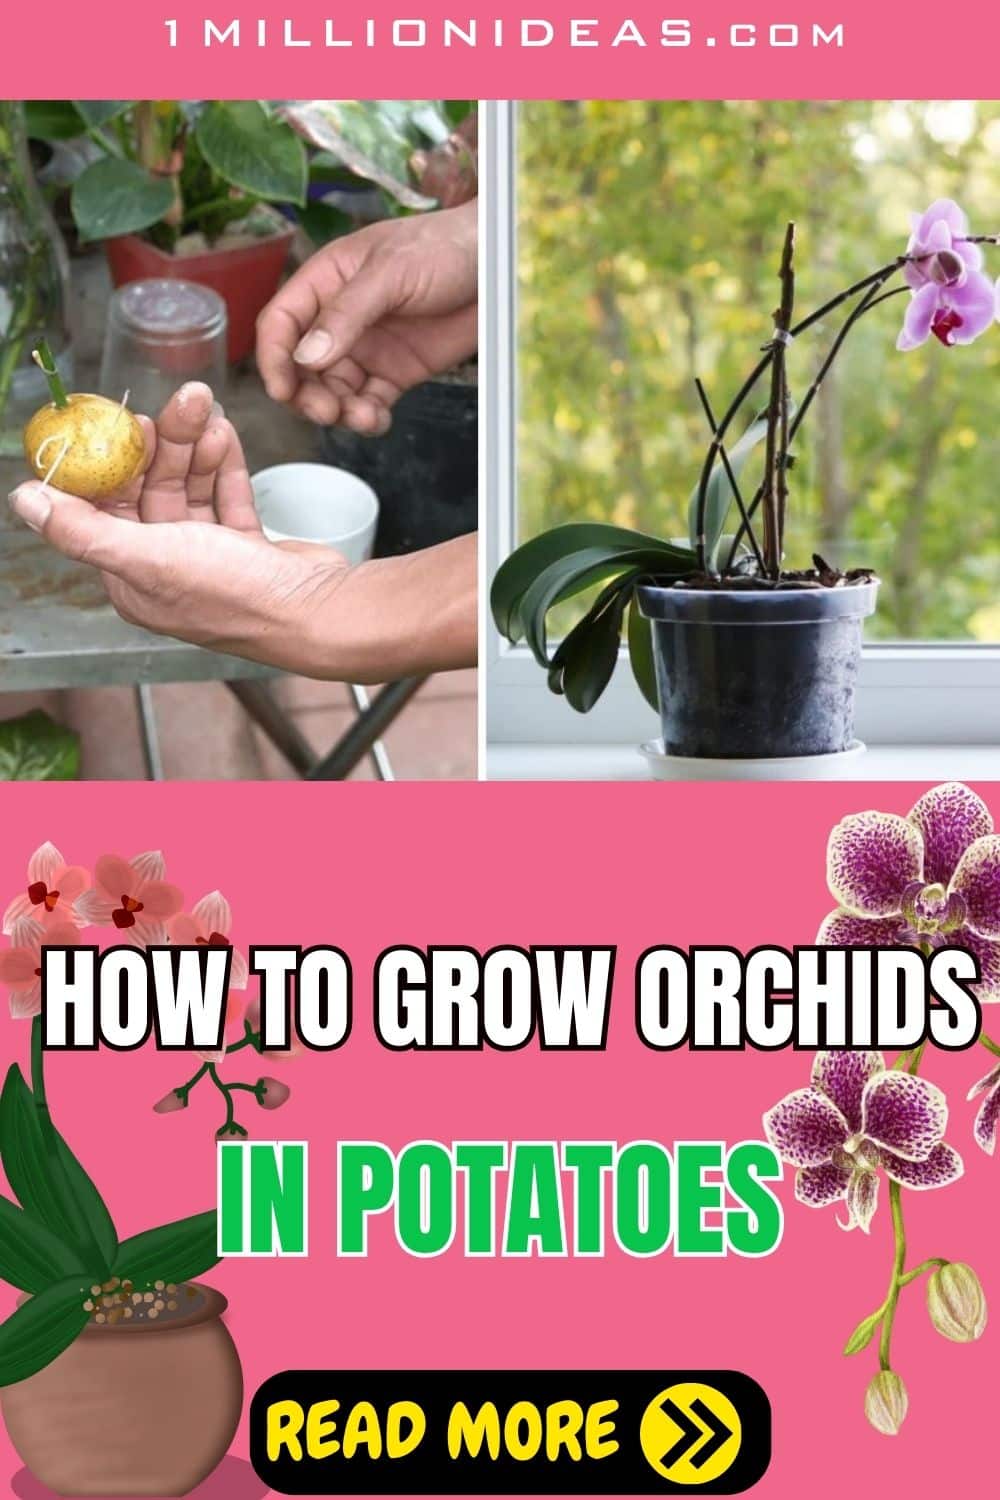 How To Grow Orchids In Potatoes With Minimal Effort - 35